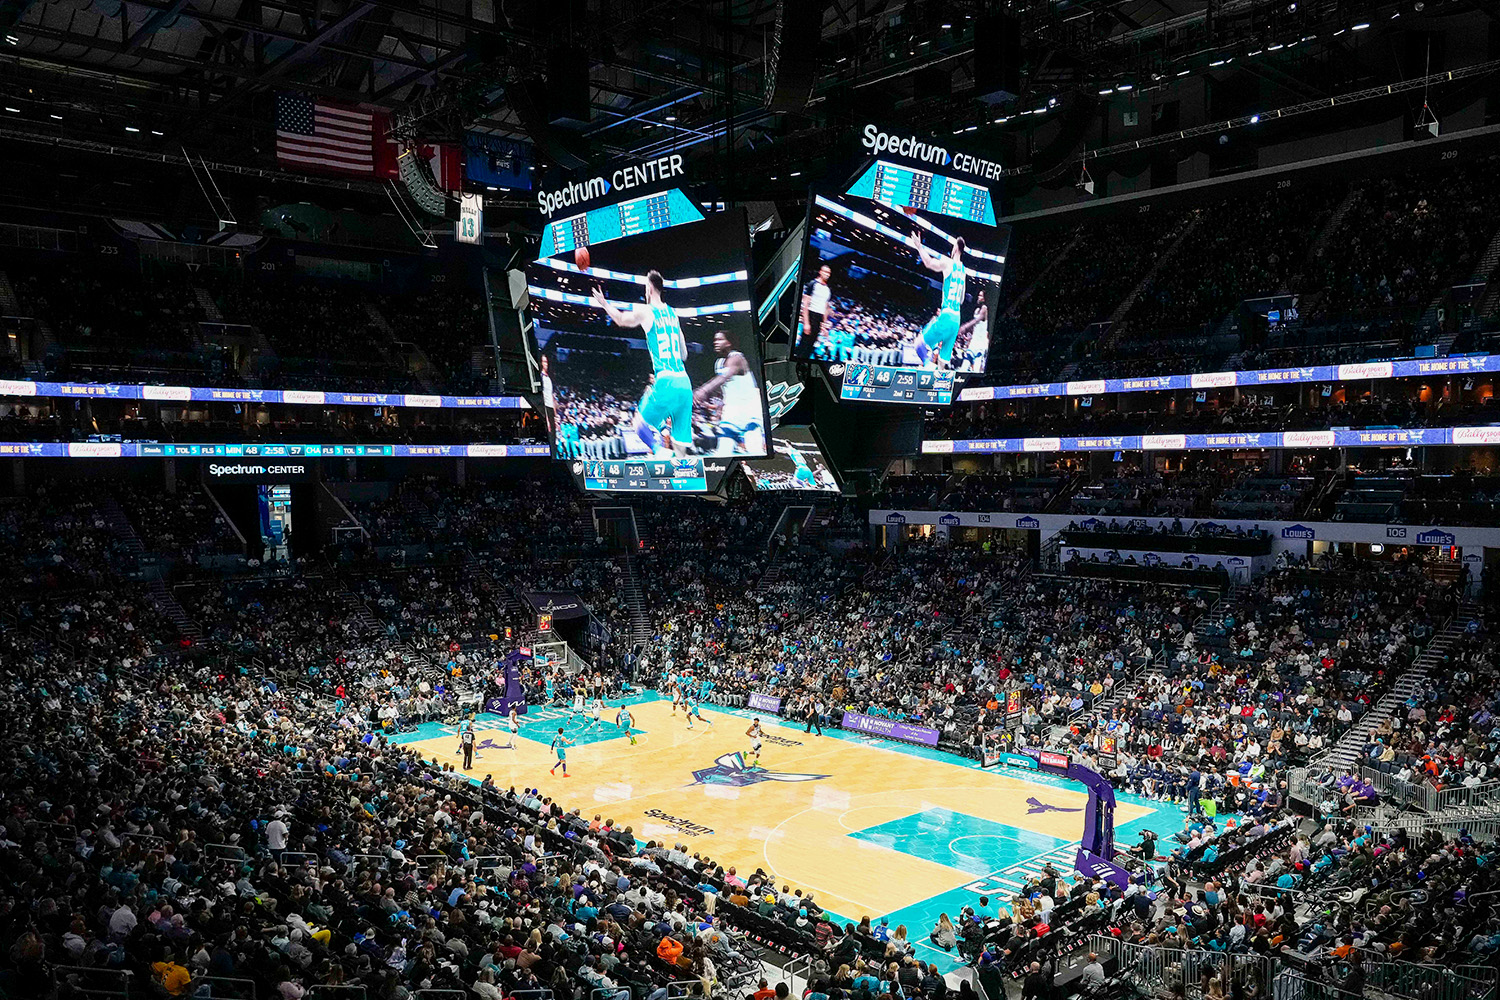 Charlotte Buzzing With $275M for Hornets' Facilities